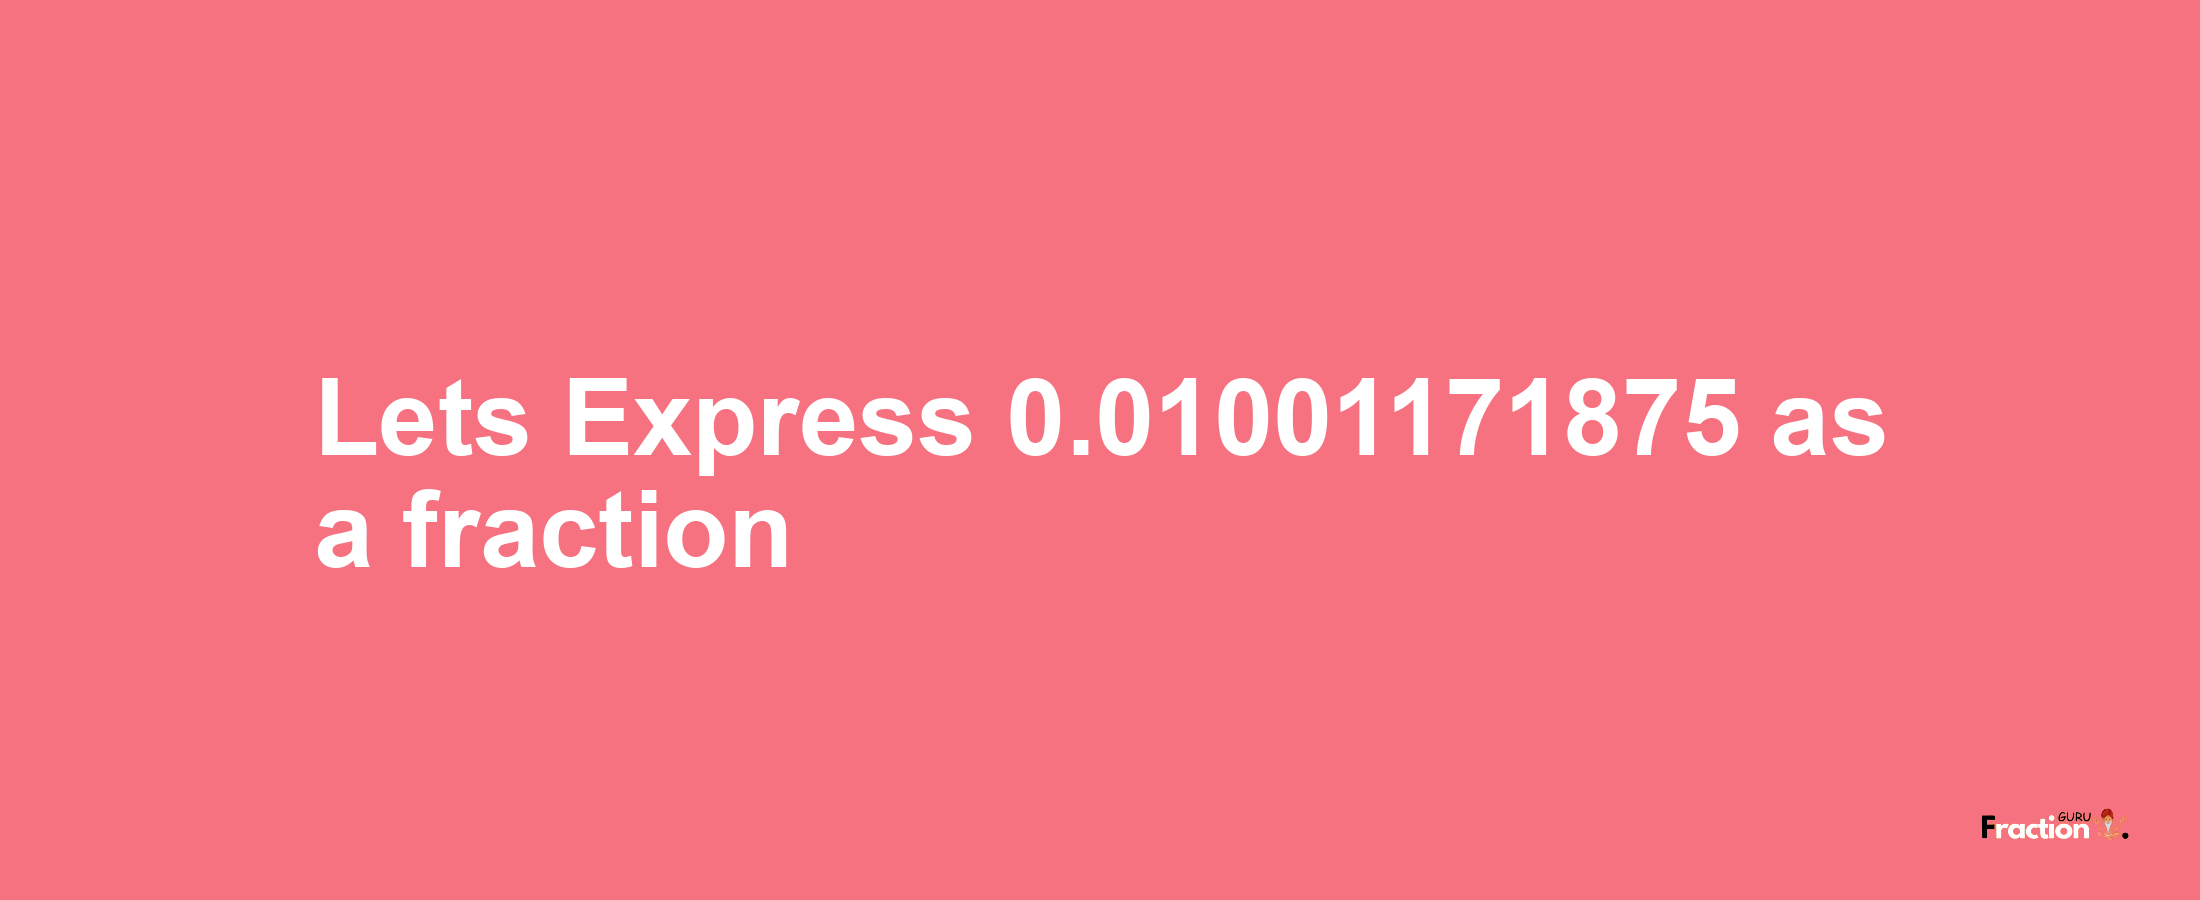 Lets Express 0.01001171875 as afraction